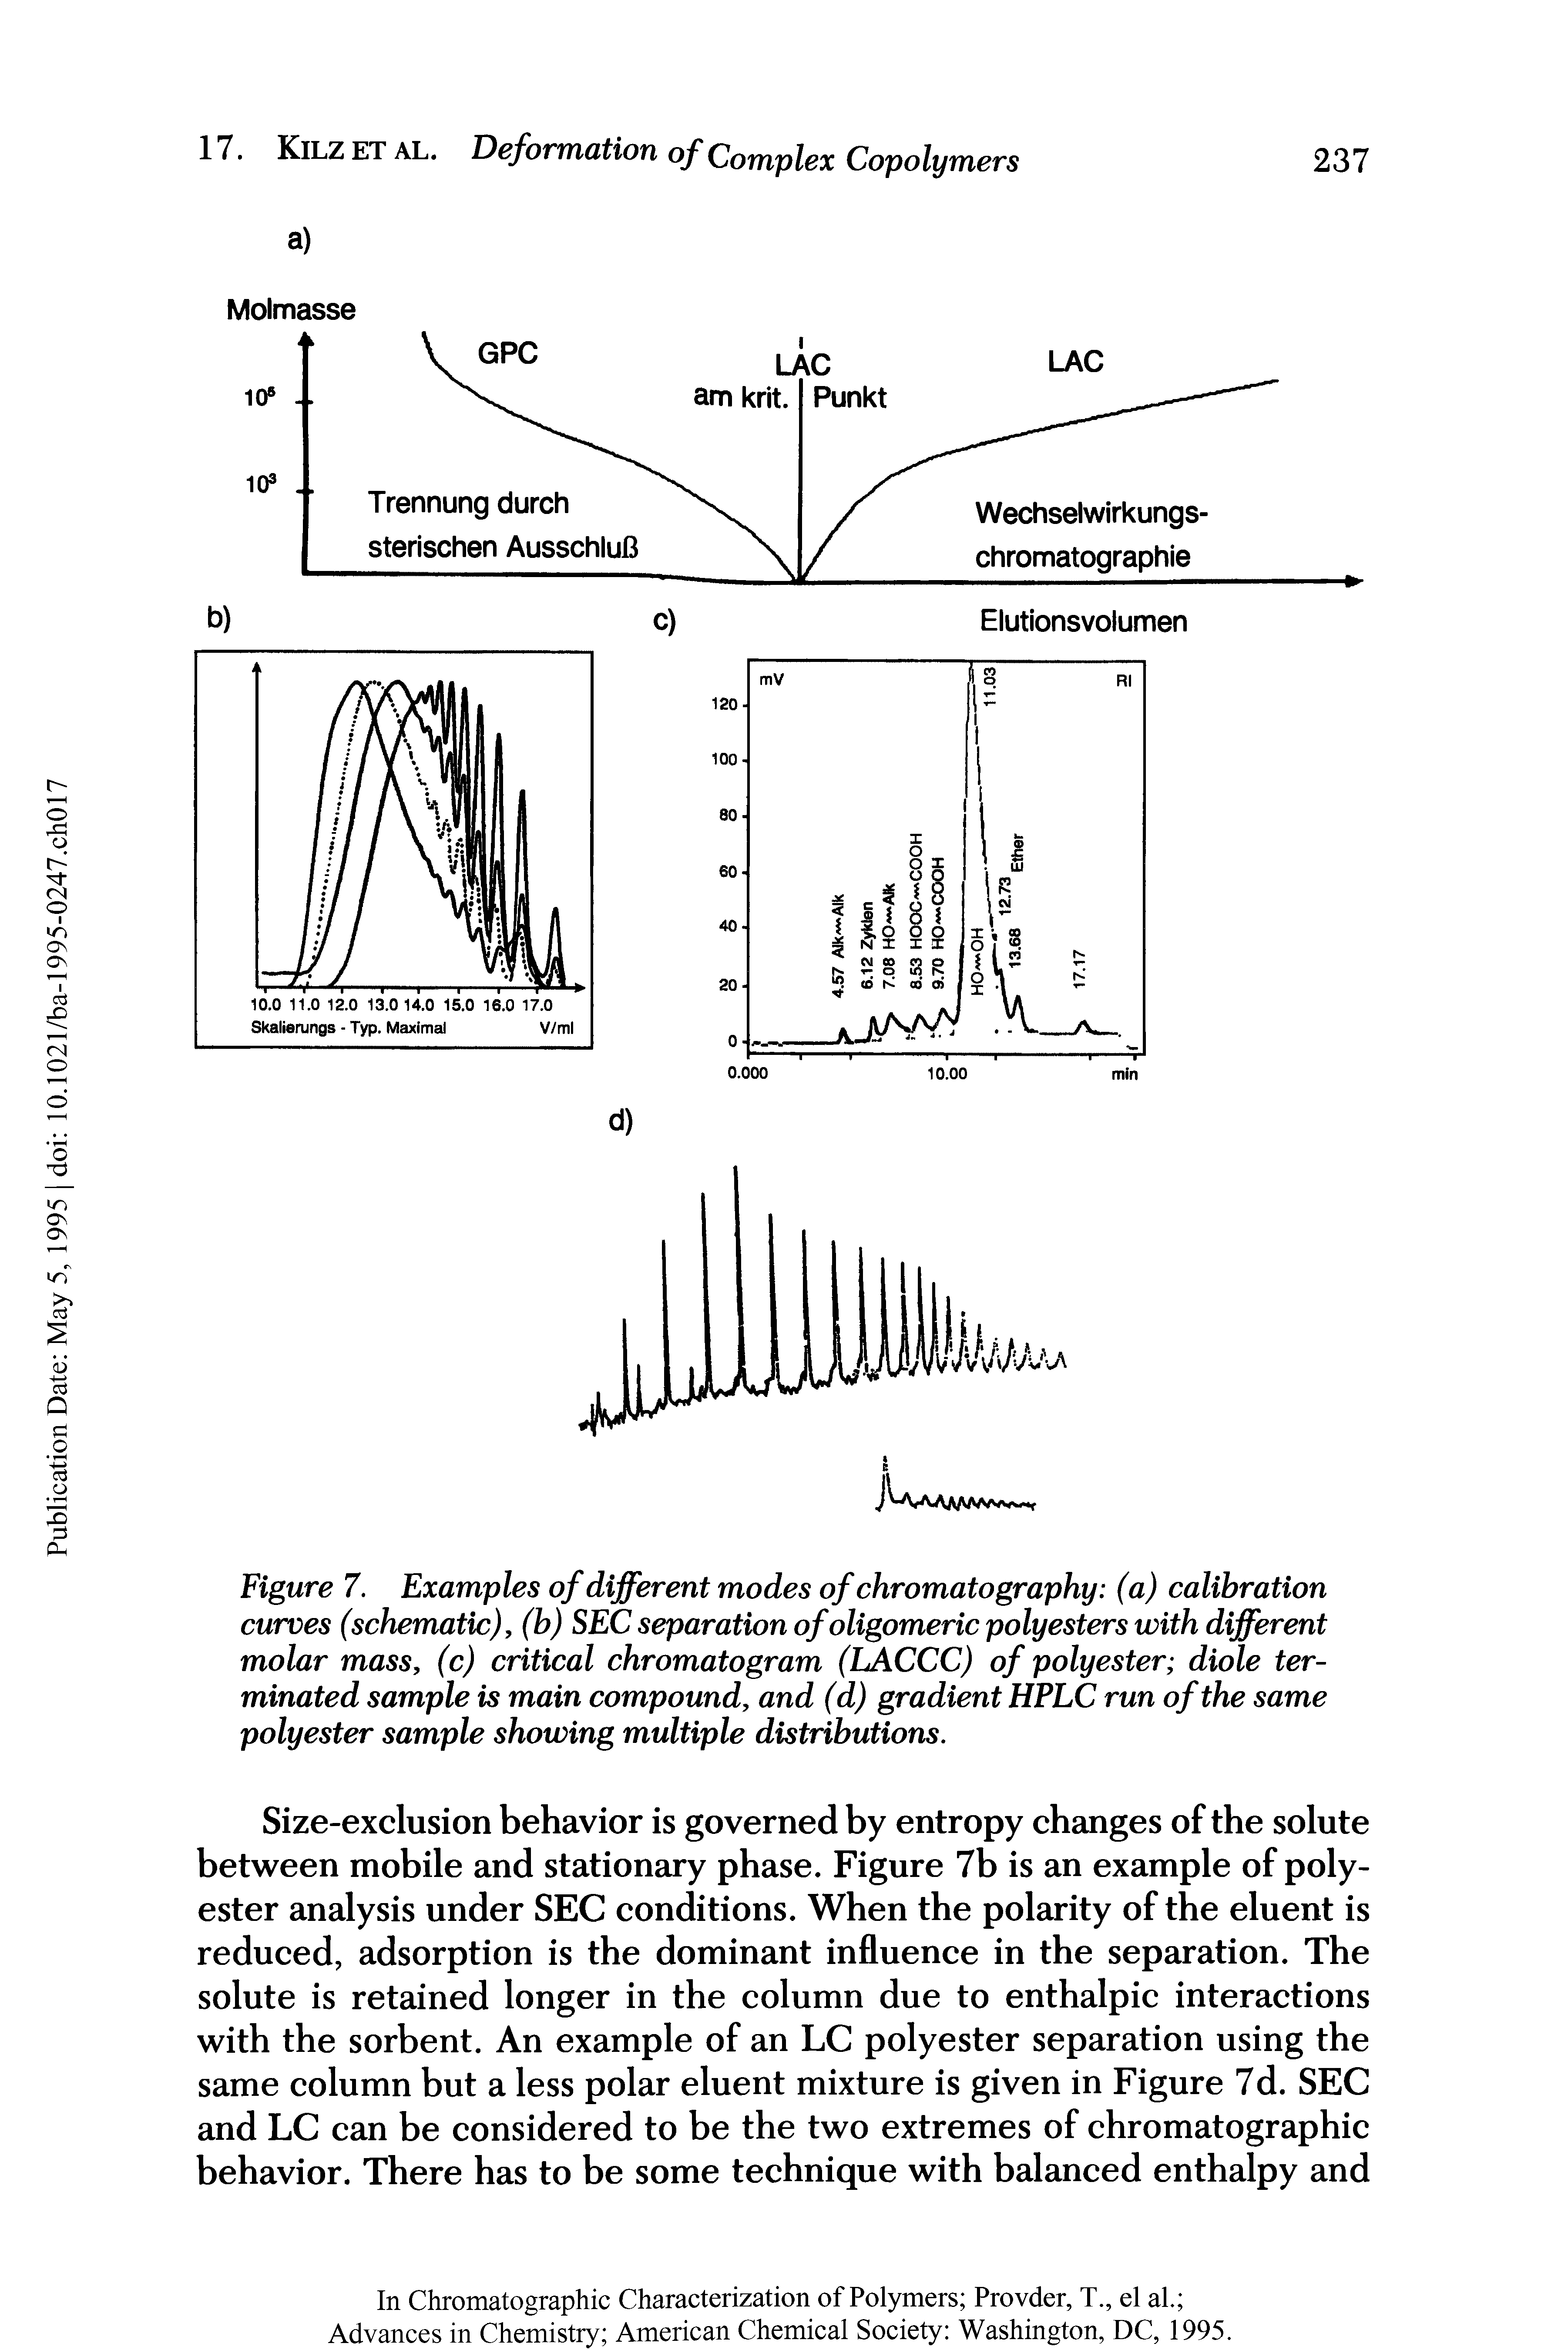 Figure 7. Examples of different modes of chromatography (a) calibration curves (schematic), (b) SEC separation of oligomeric polyesters with different molar mass, (c) critical chromatogram (LACCC) of polyester diole terminated sample is main compound, and (d) gradient HPLC run of the same polyester sample showing multiple distributions.